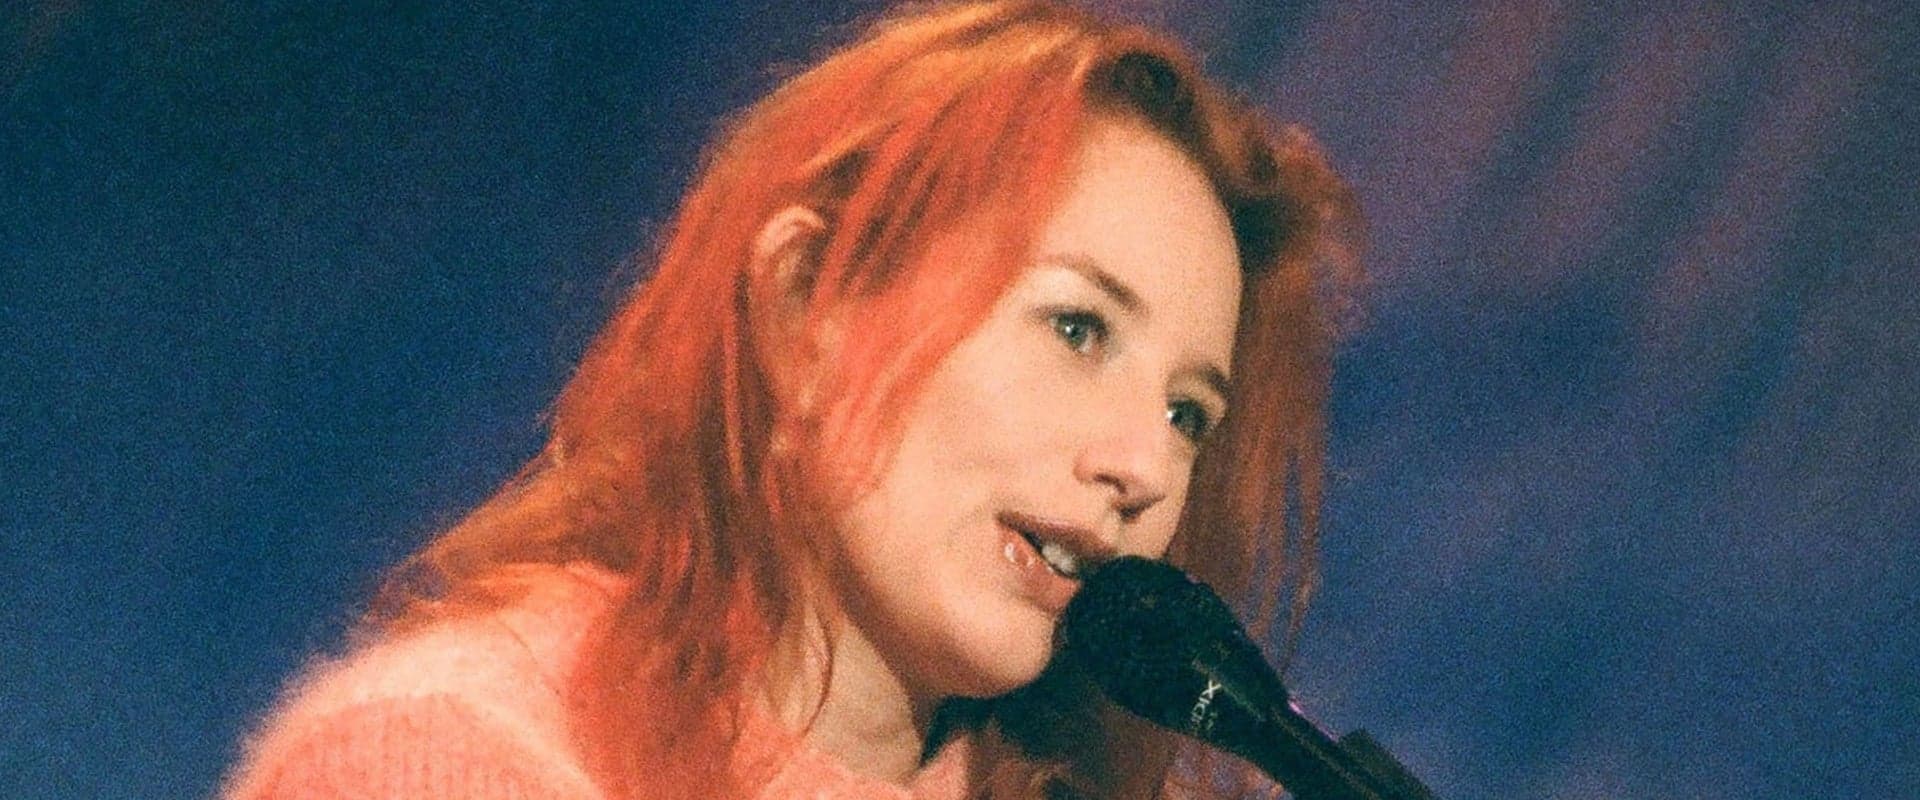 Tori Amos: Live from New York